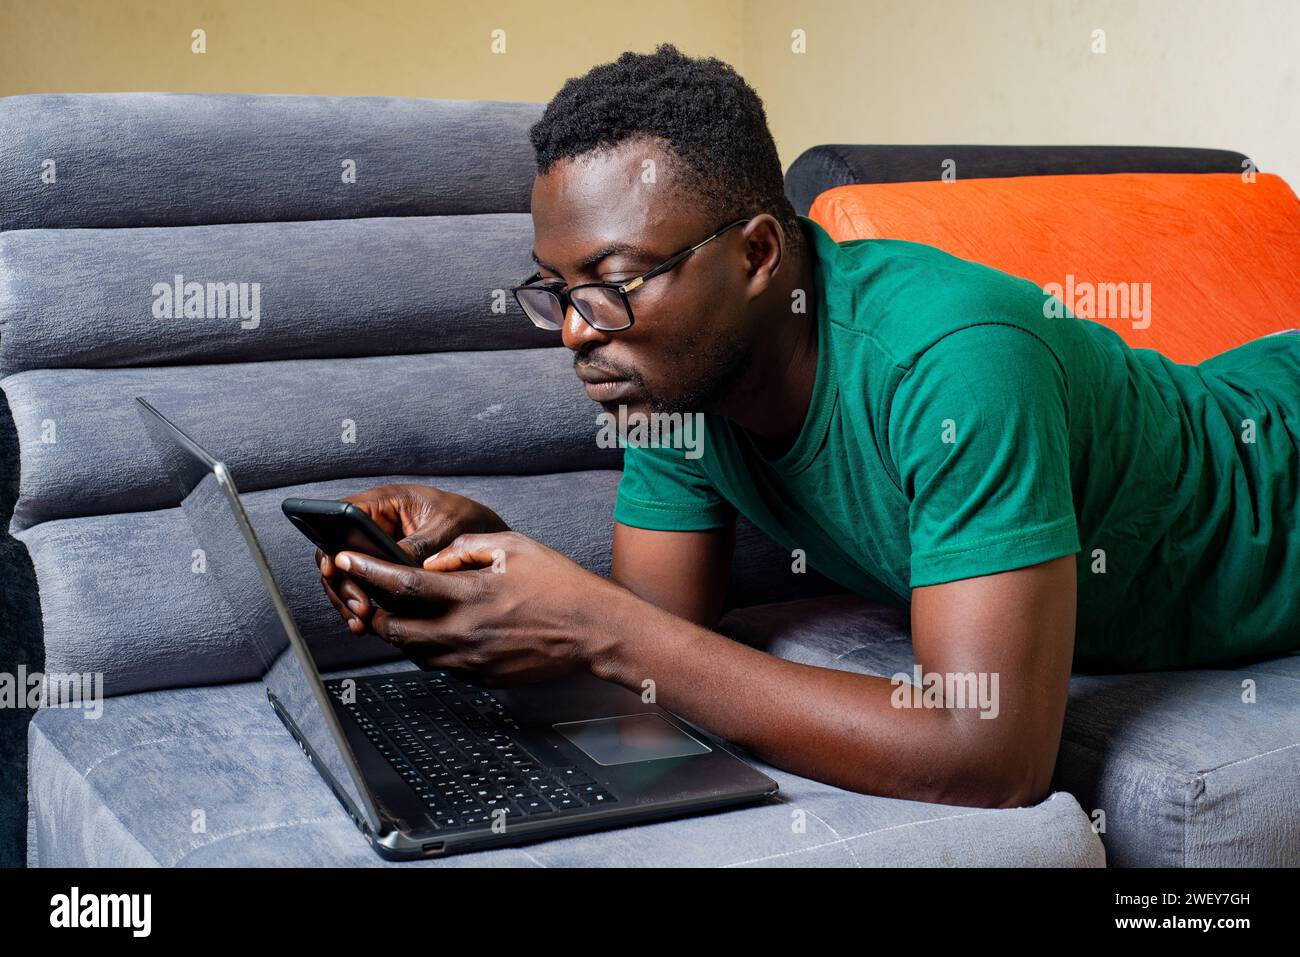 young man wearing optical glasses lying on sofa at home uses mobile phone and laptop. Stock Photo